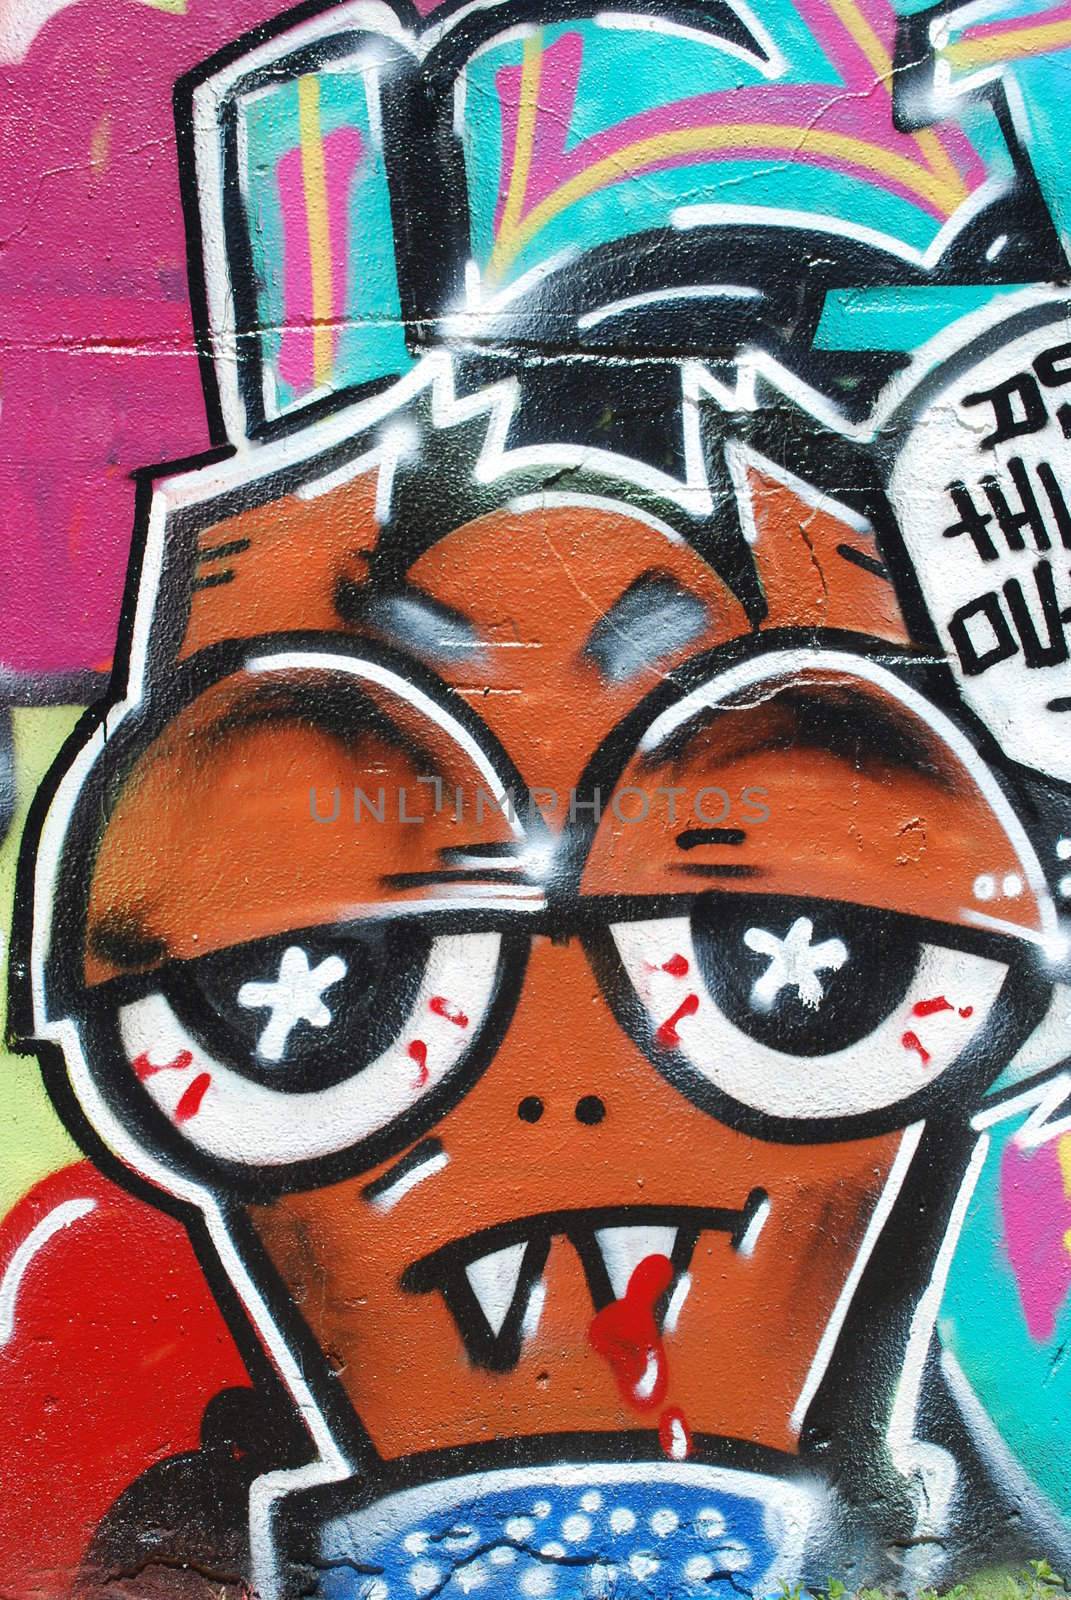 Graffiti Wall (Face) by luissantos84